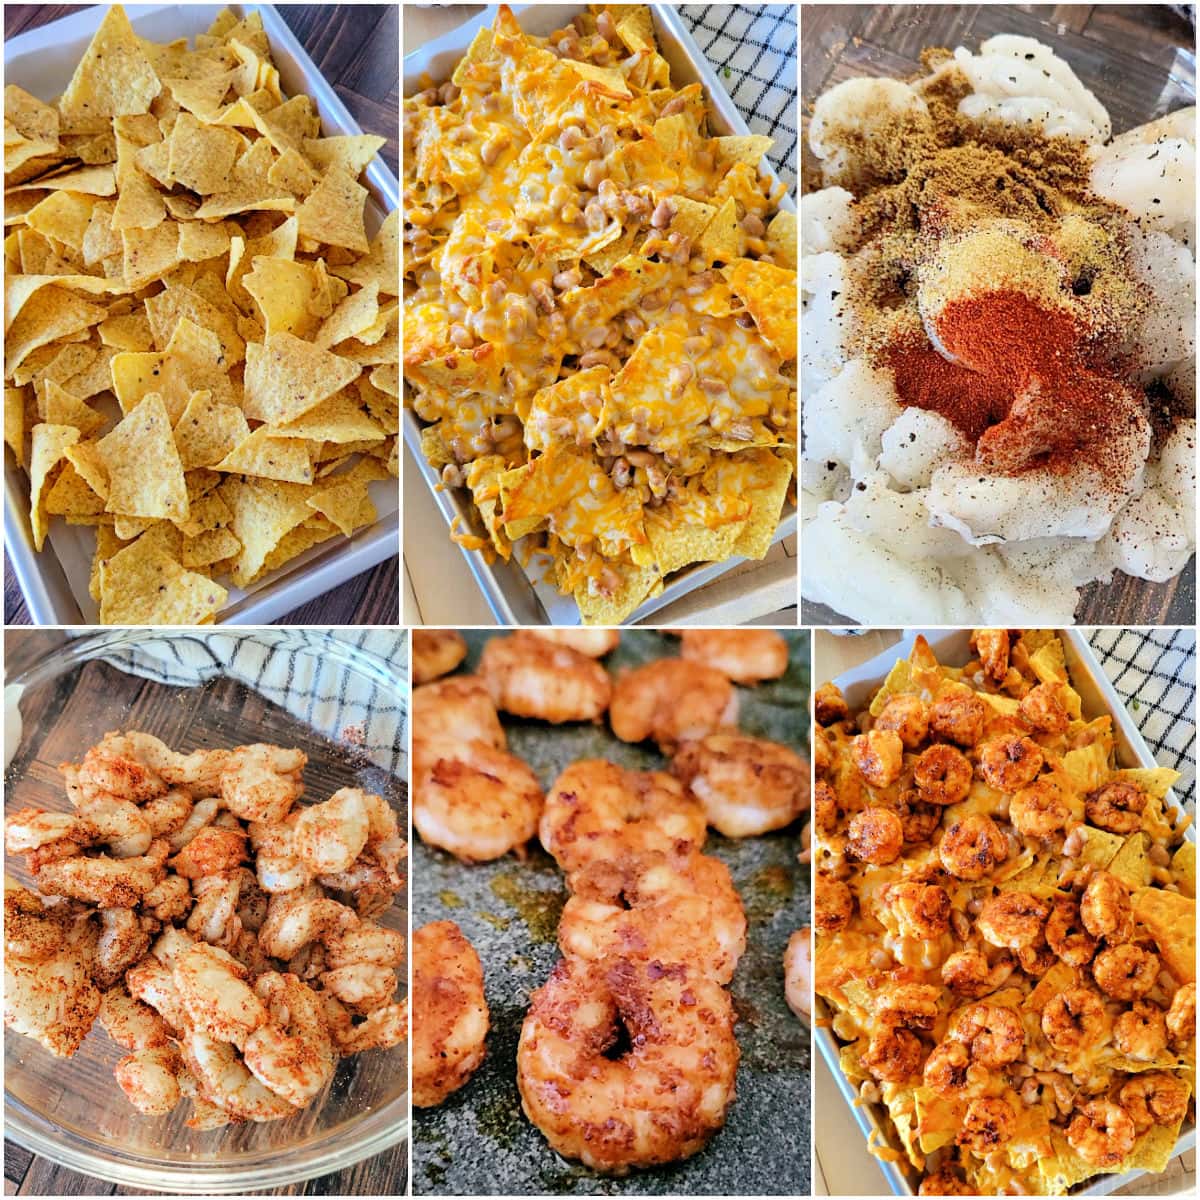 six image collage that shows how to make shrimp nachos step by step including seasoning the shrimp.